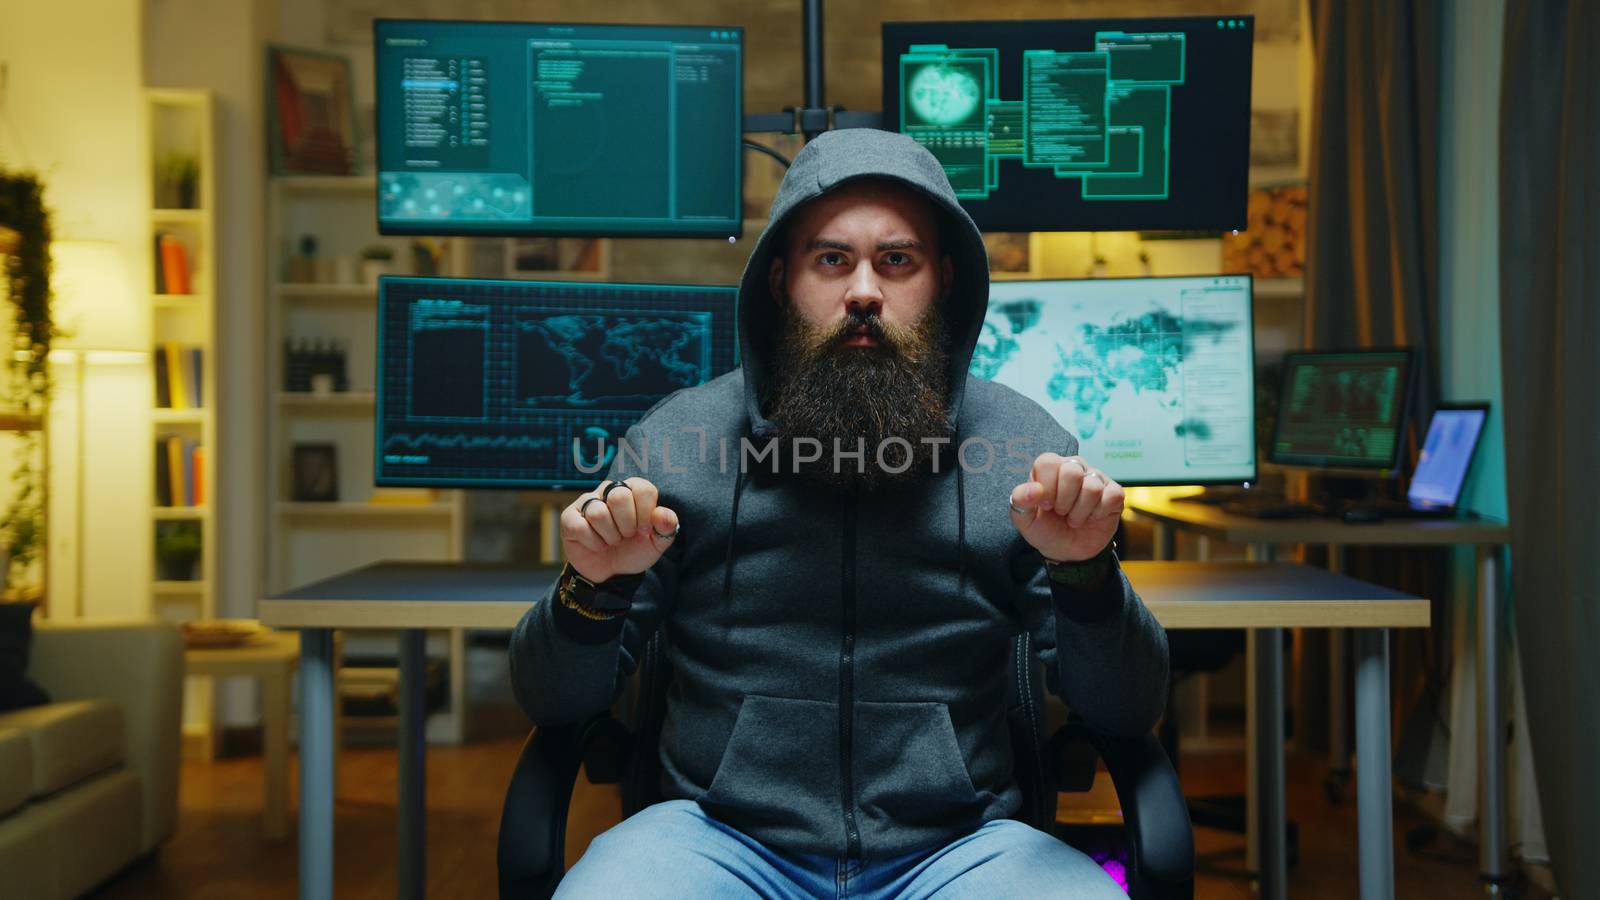 Bearded hacker wearing a hoodie using augmented technology to break government firewall.